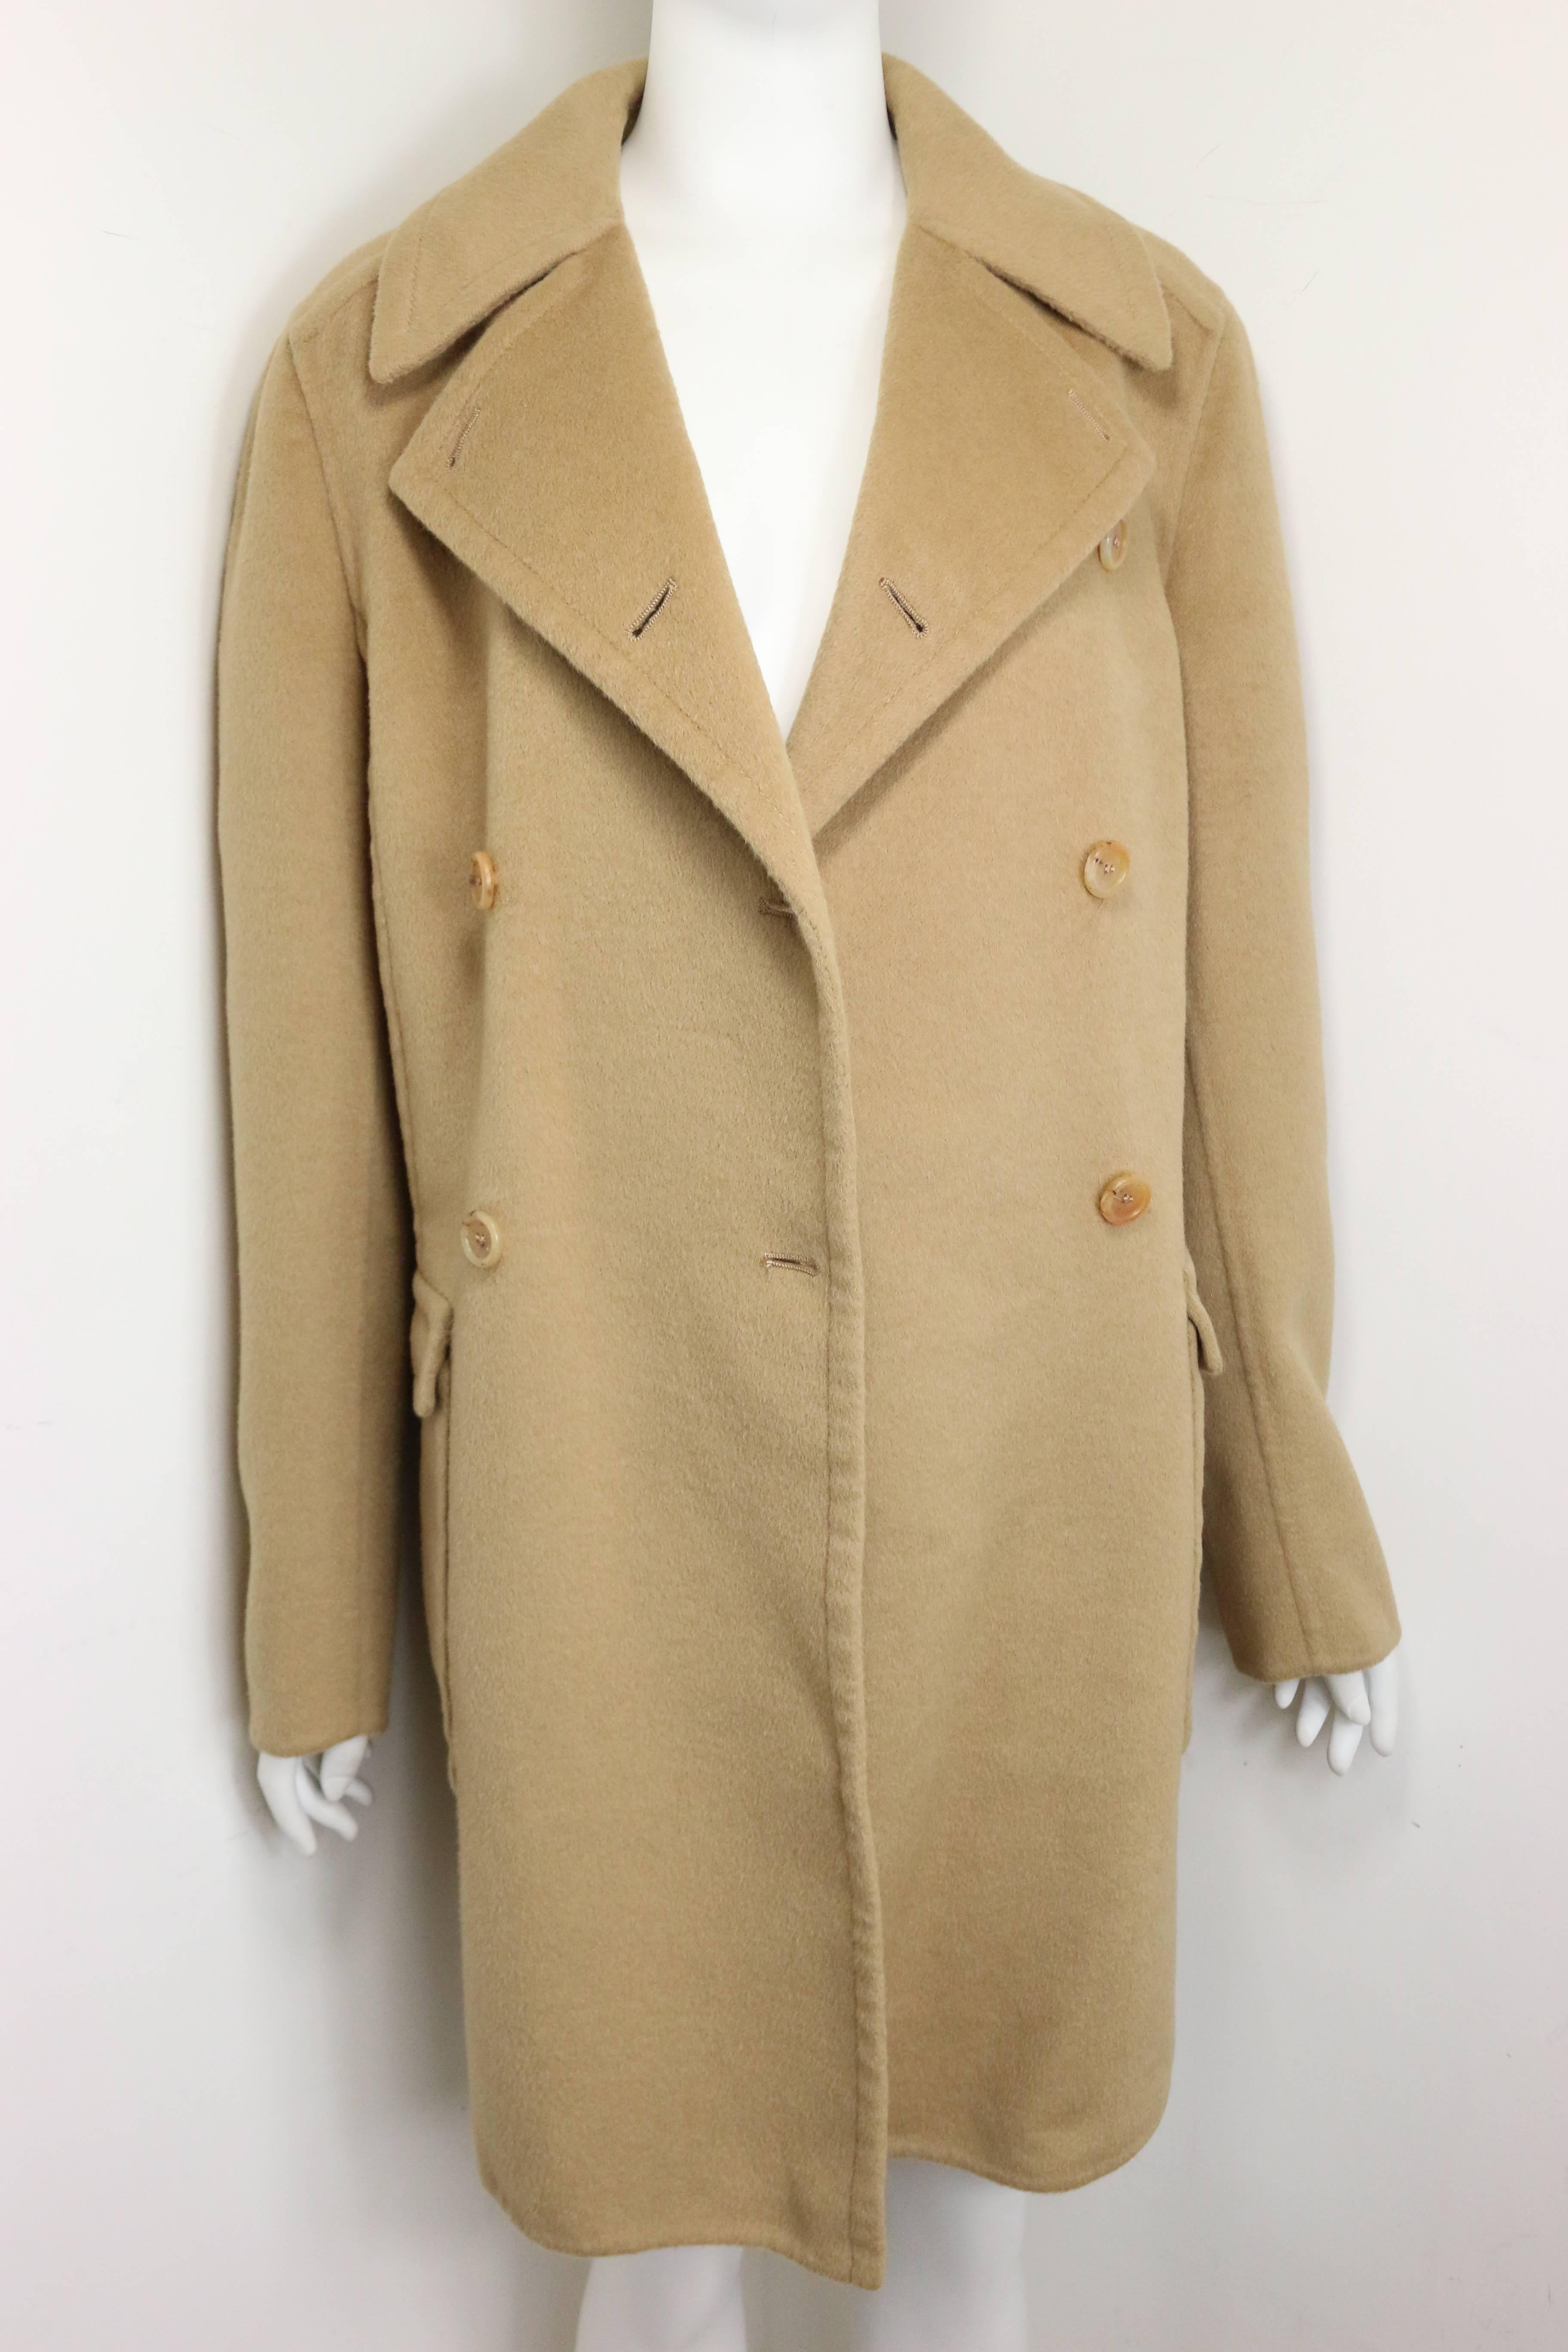 Prada Camel Wool Angora Goat Hair Double Breasted Coat  For Sale 2